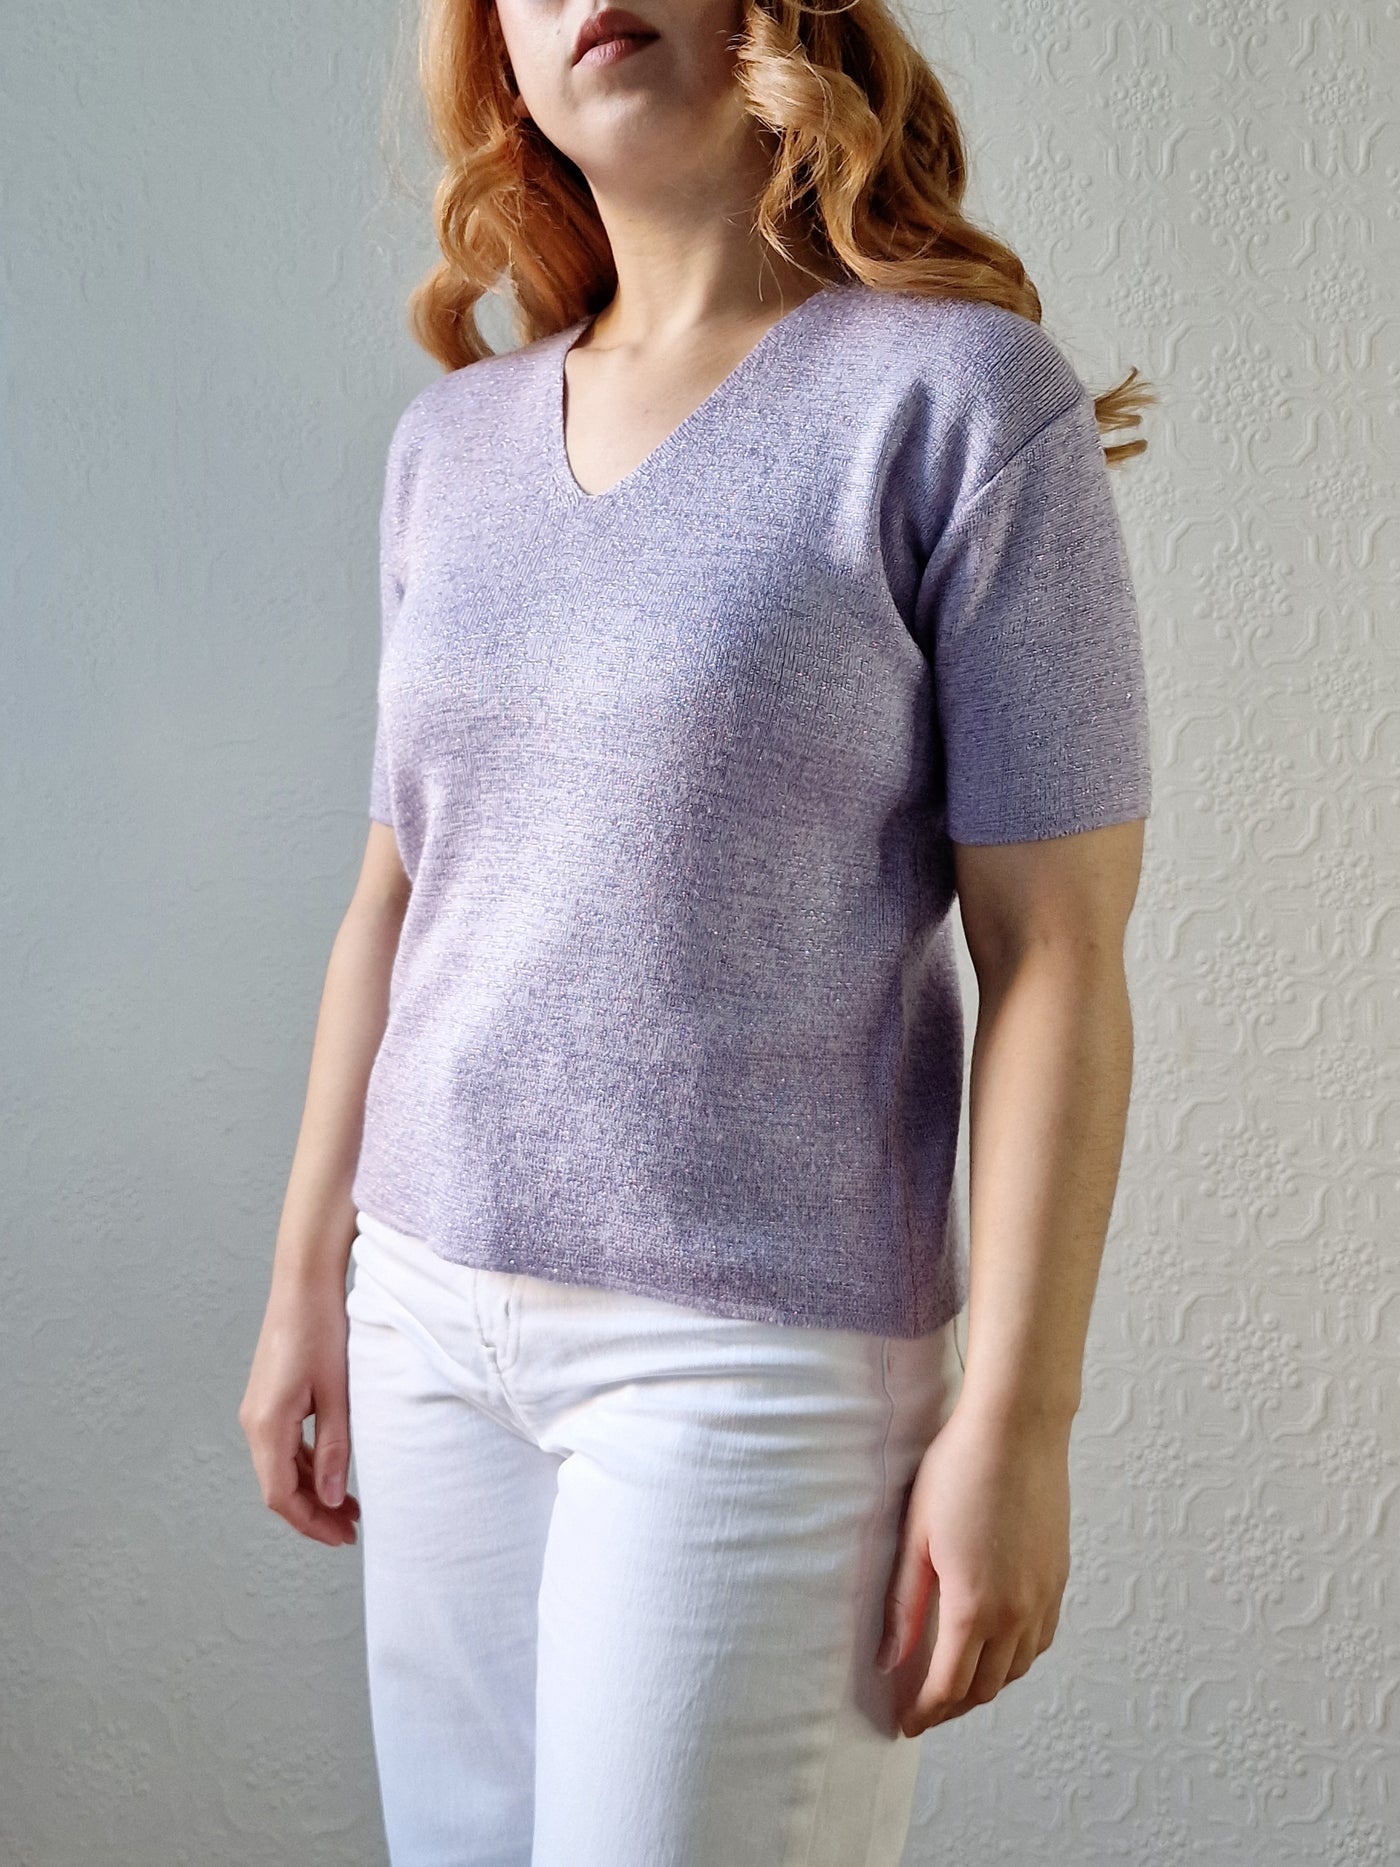 Vintage 90s Lilac Purple V-Neck Knitted Lurex Top with Short Sleeves - S/M